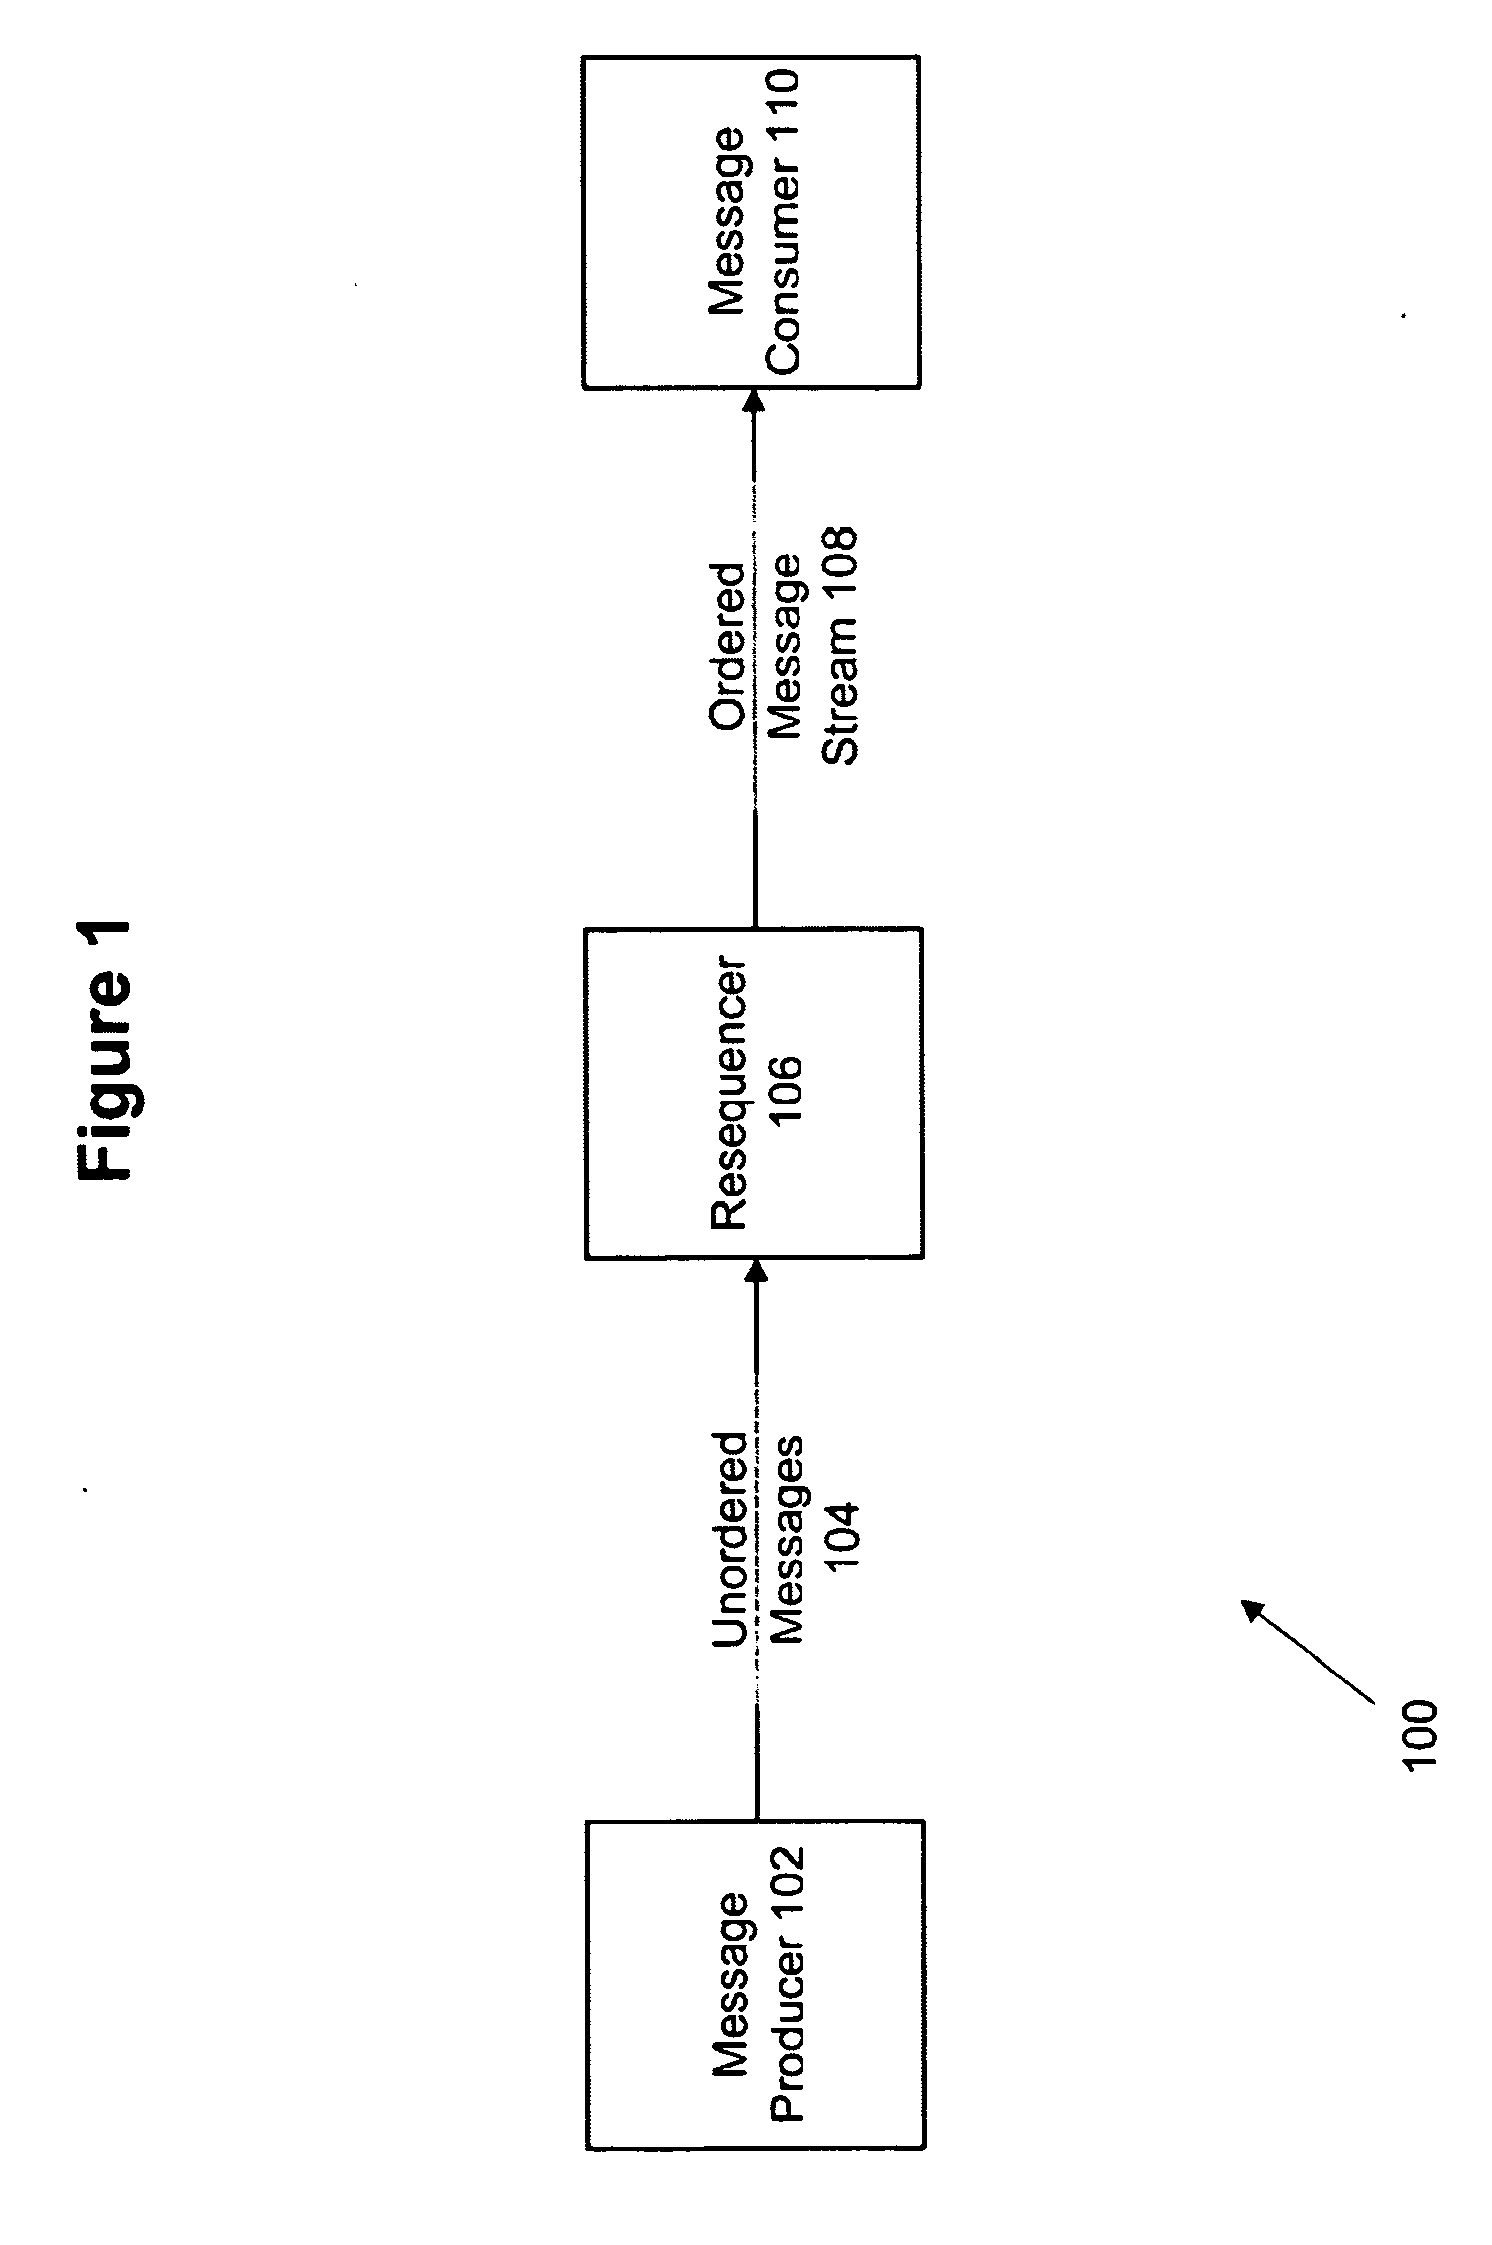 Method and system for implementing sequence start and increment values for a resequencer